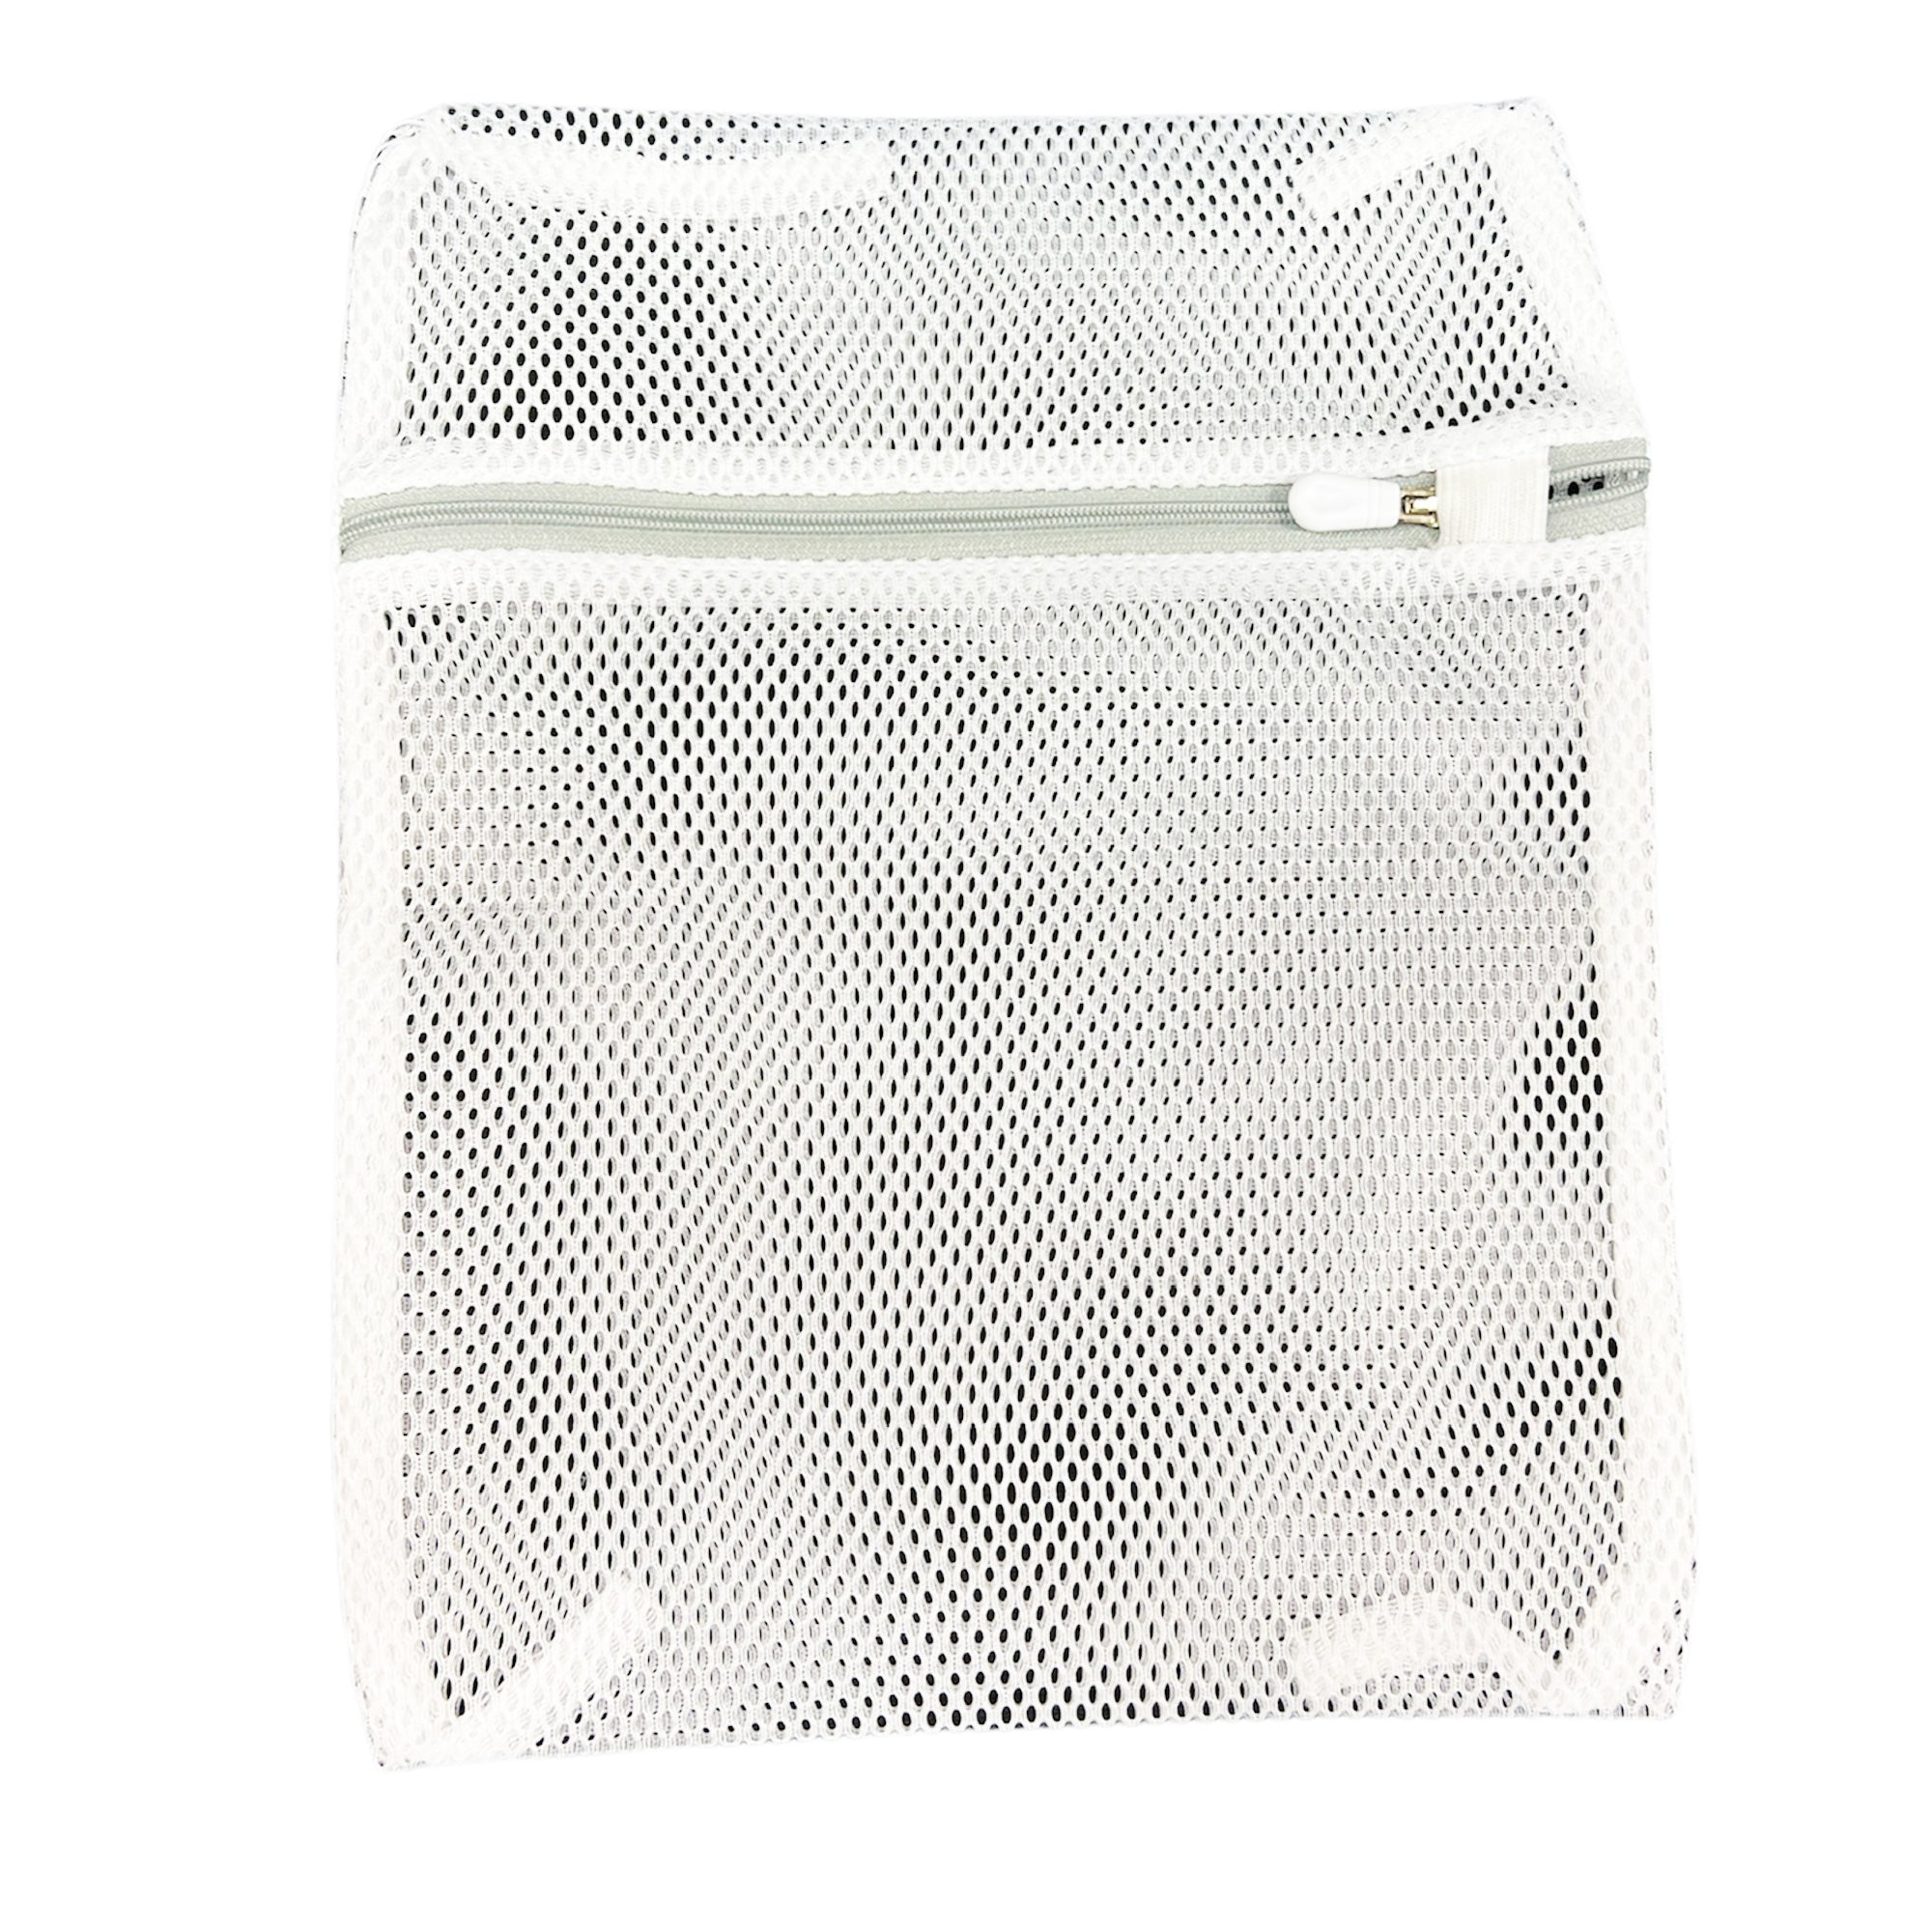 Laundry net / Laundry bag white with zipper (protects satin in the